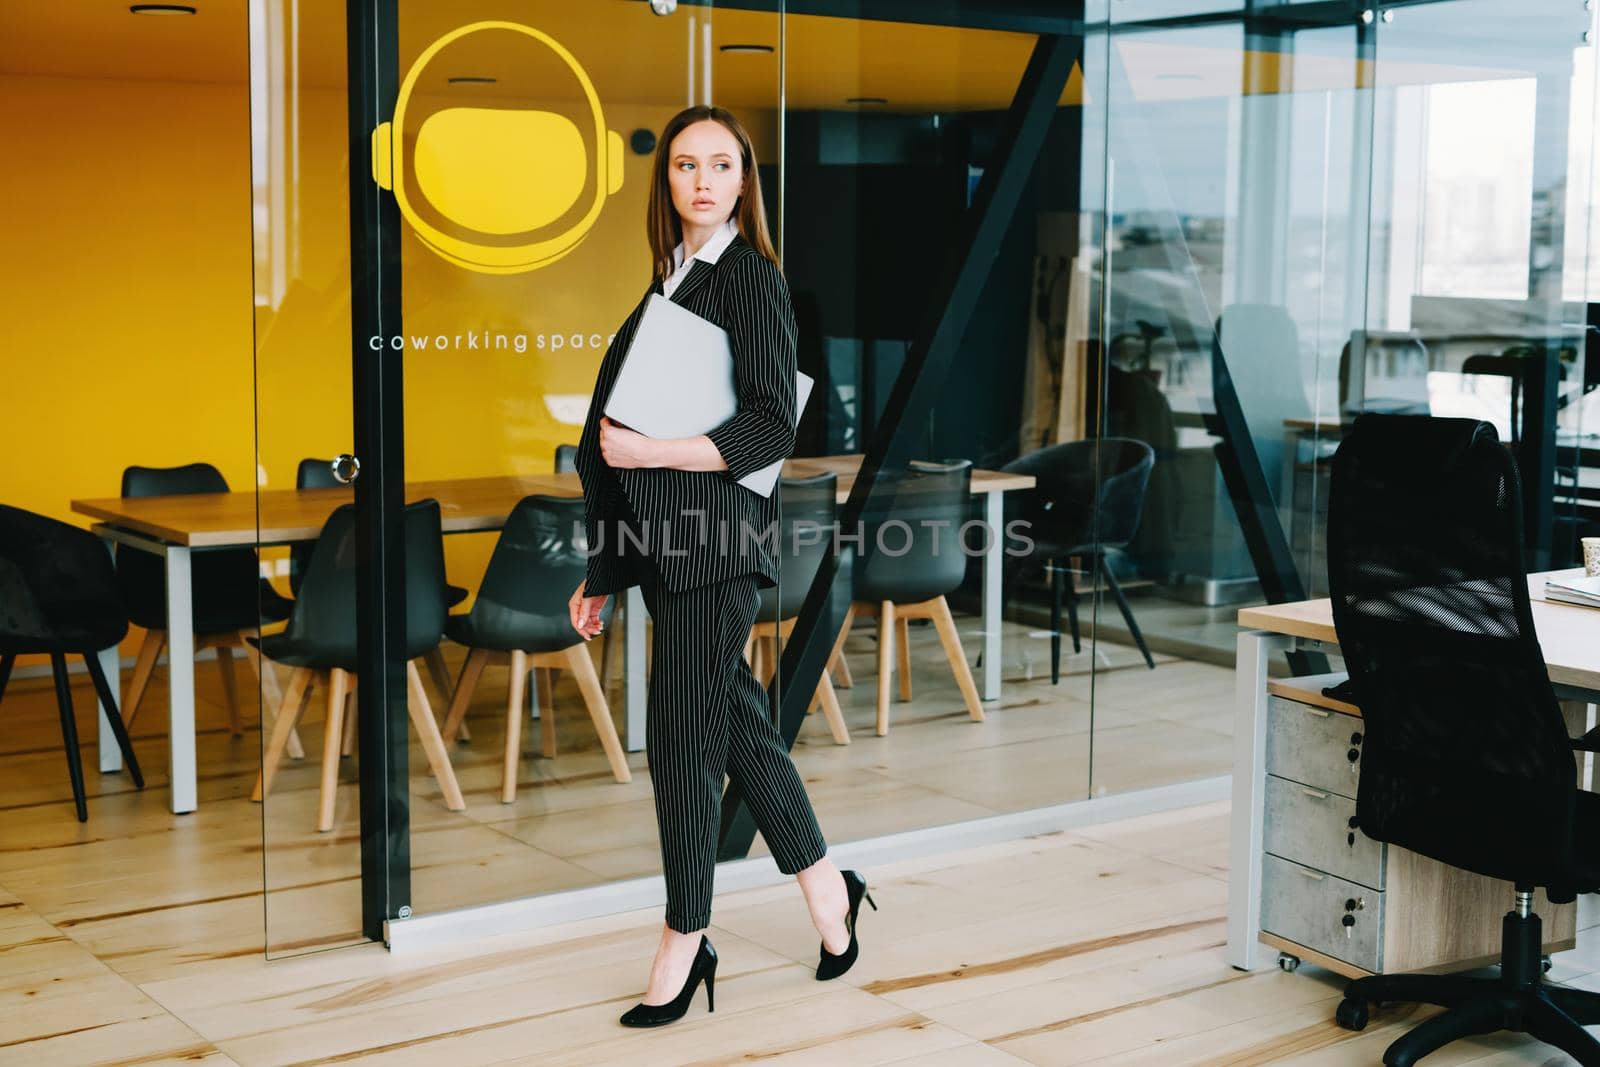 Business lady in a stylish office. A girl in the office with a laptop. Freelancer. Manager. Spacious office with glass partitions and doors, yellow and black walls.